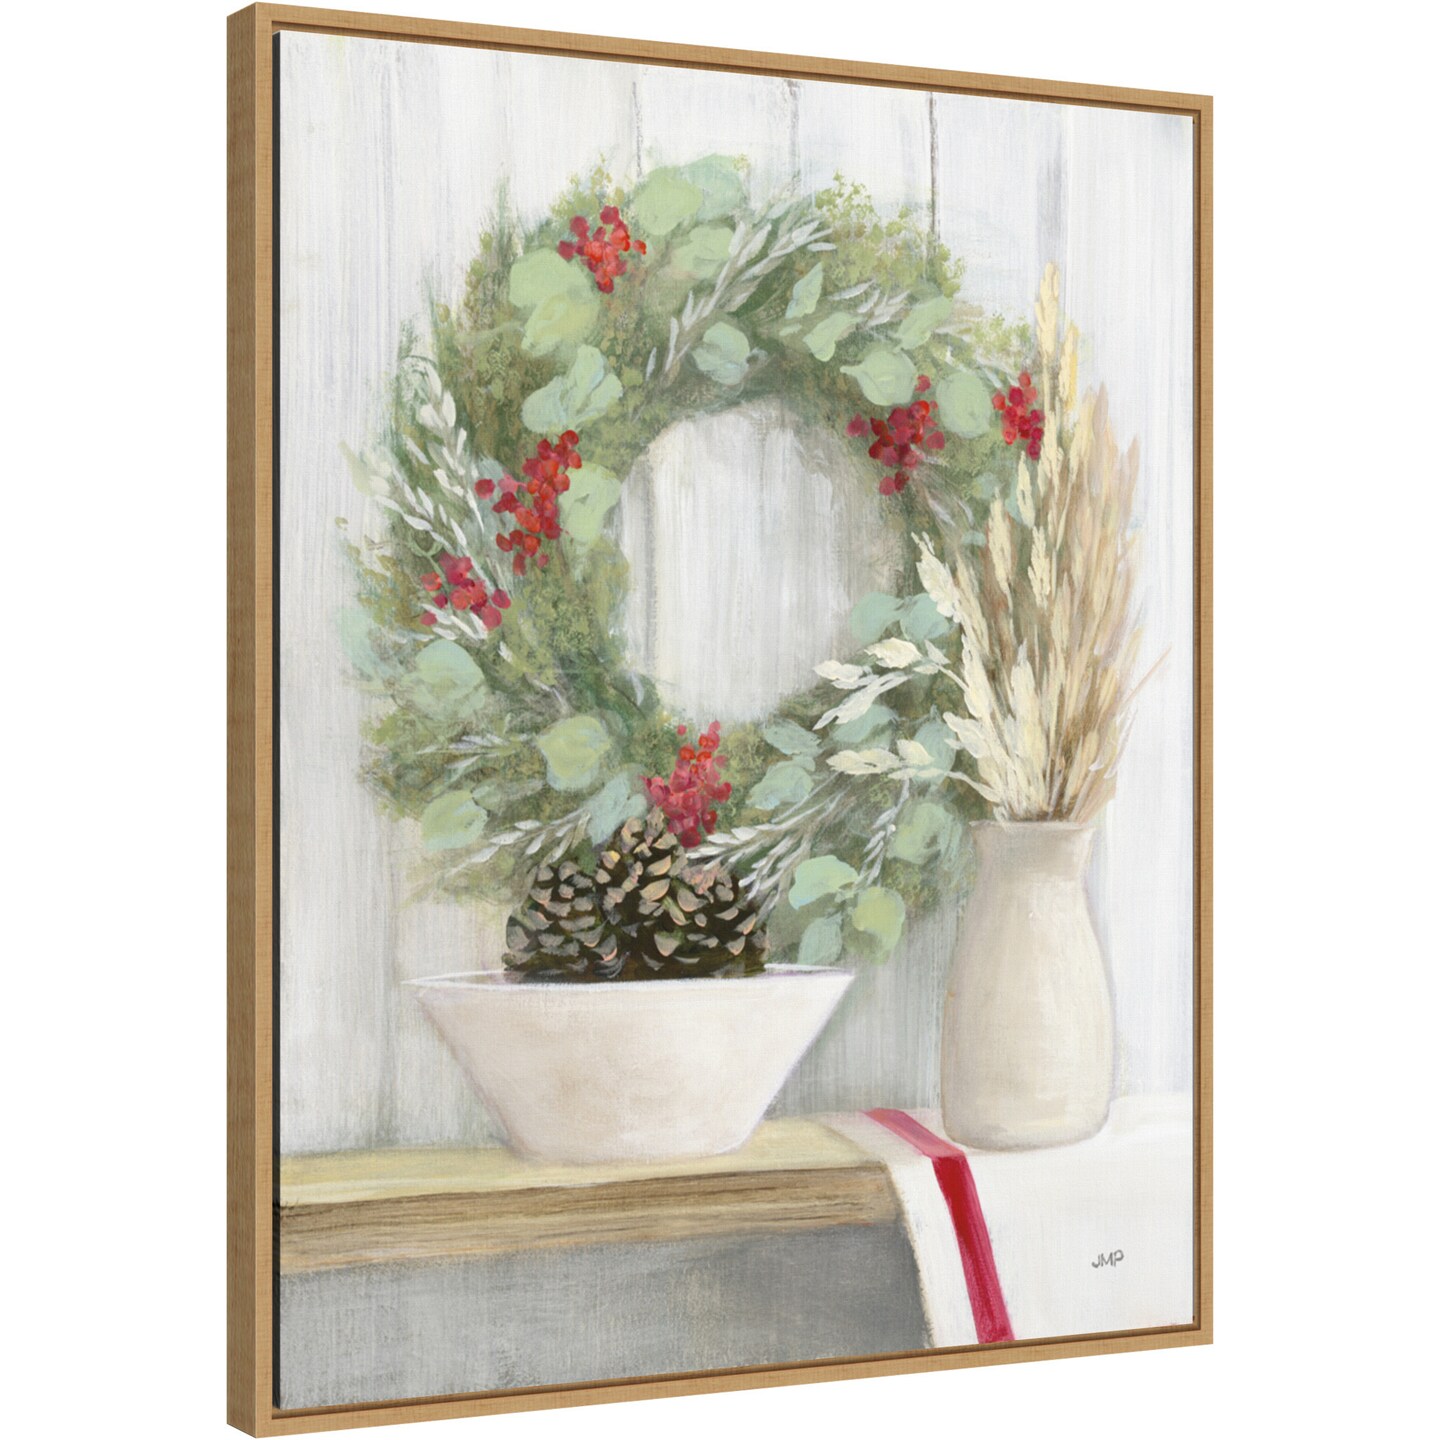 Natural Christmas I by Julia Purinton 23-in. W x 28-in. H. Canvas Wall Art Print Framed in Natural